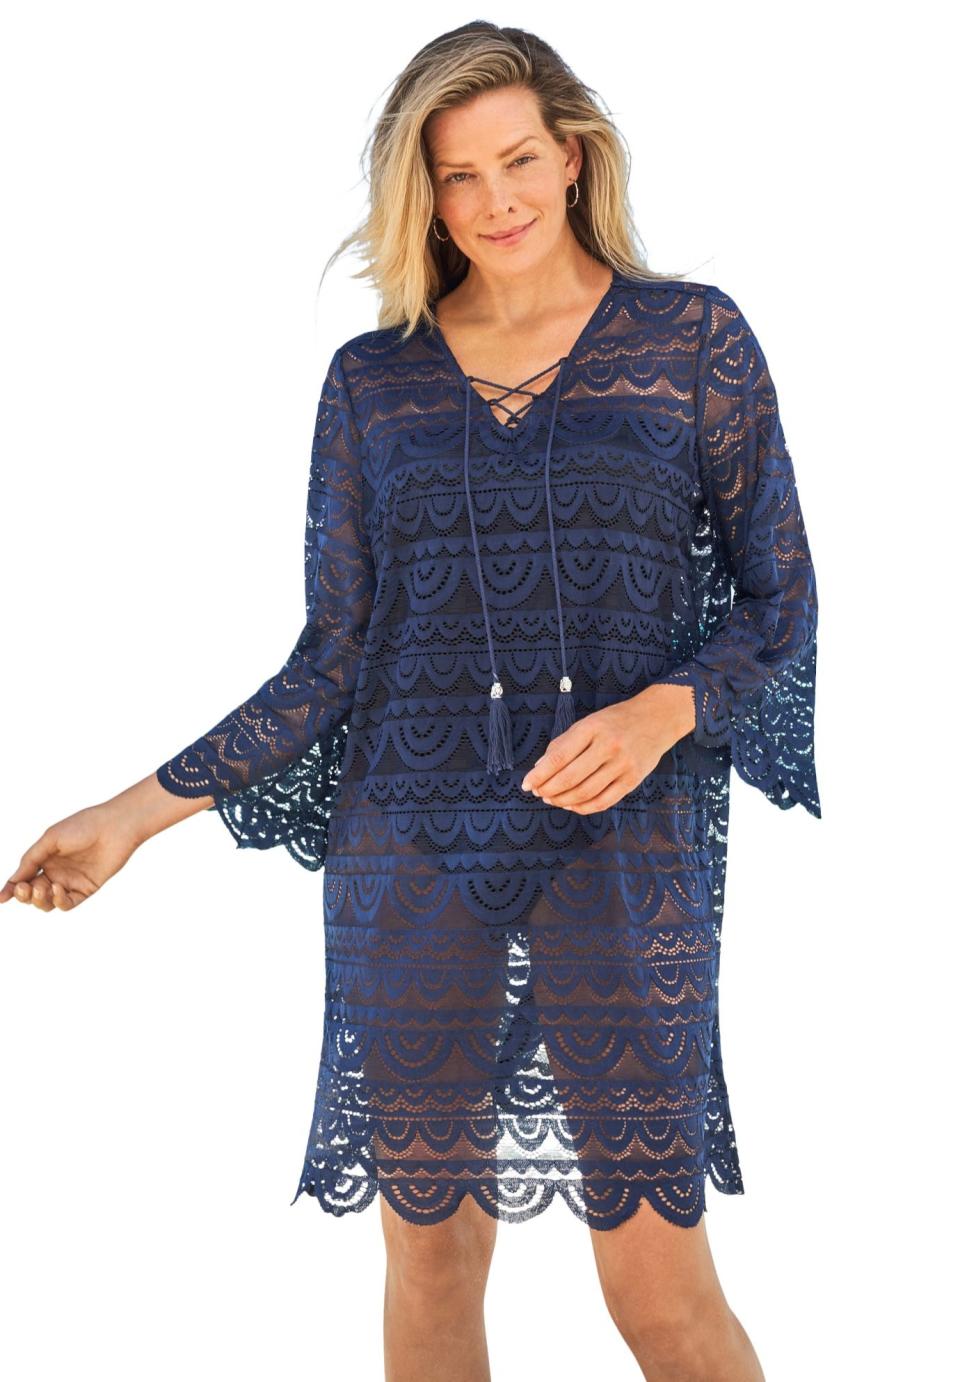 Plus-Size Scallop Lace Cover Up